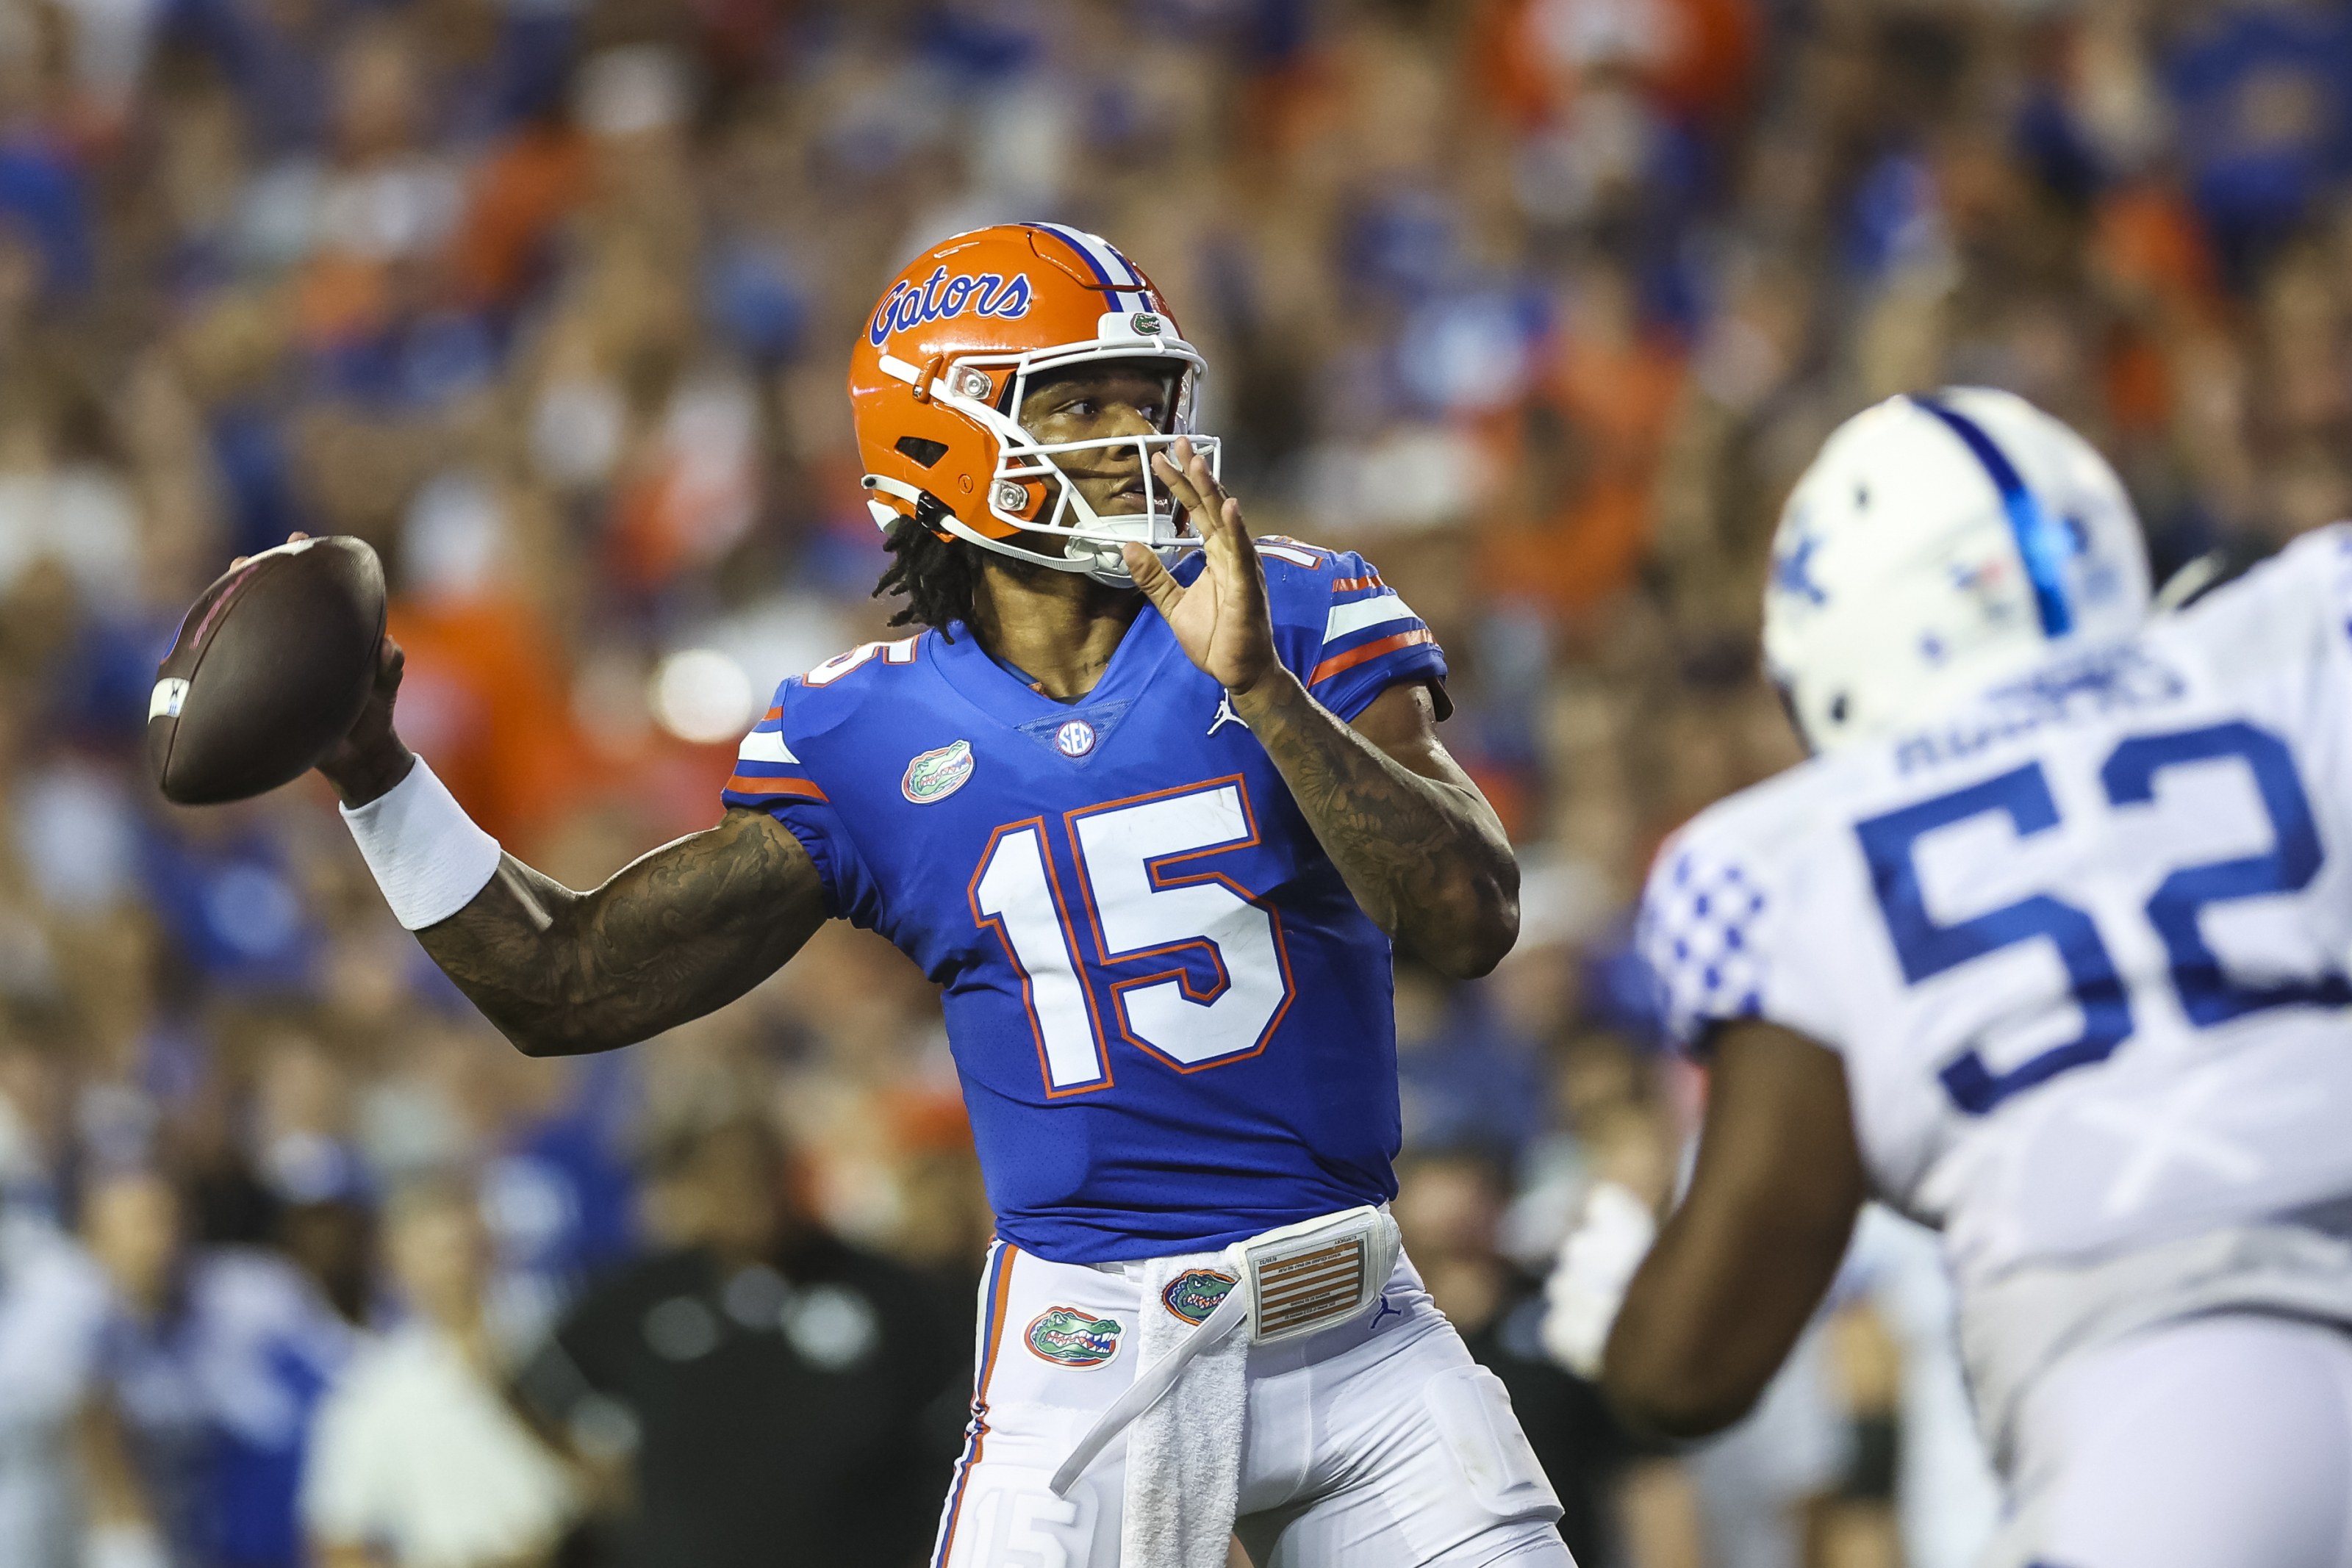 Florida football: Tim Tebow Weighs in on Anthony Richardson